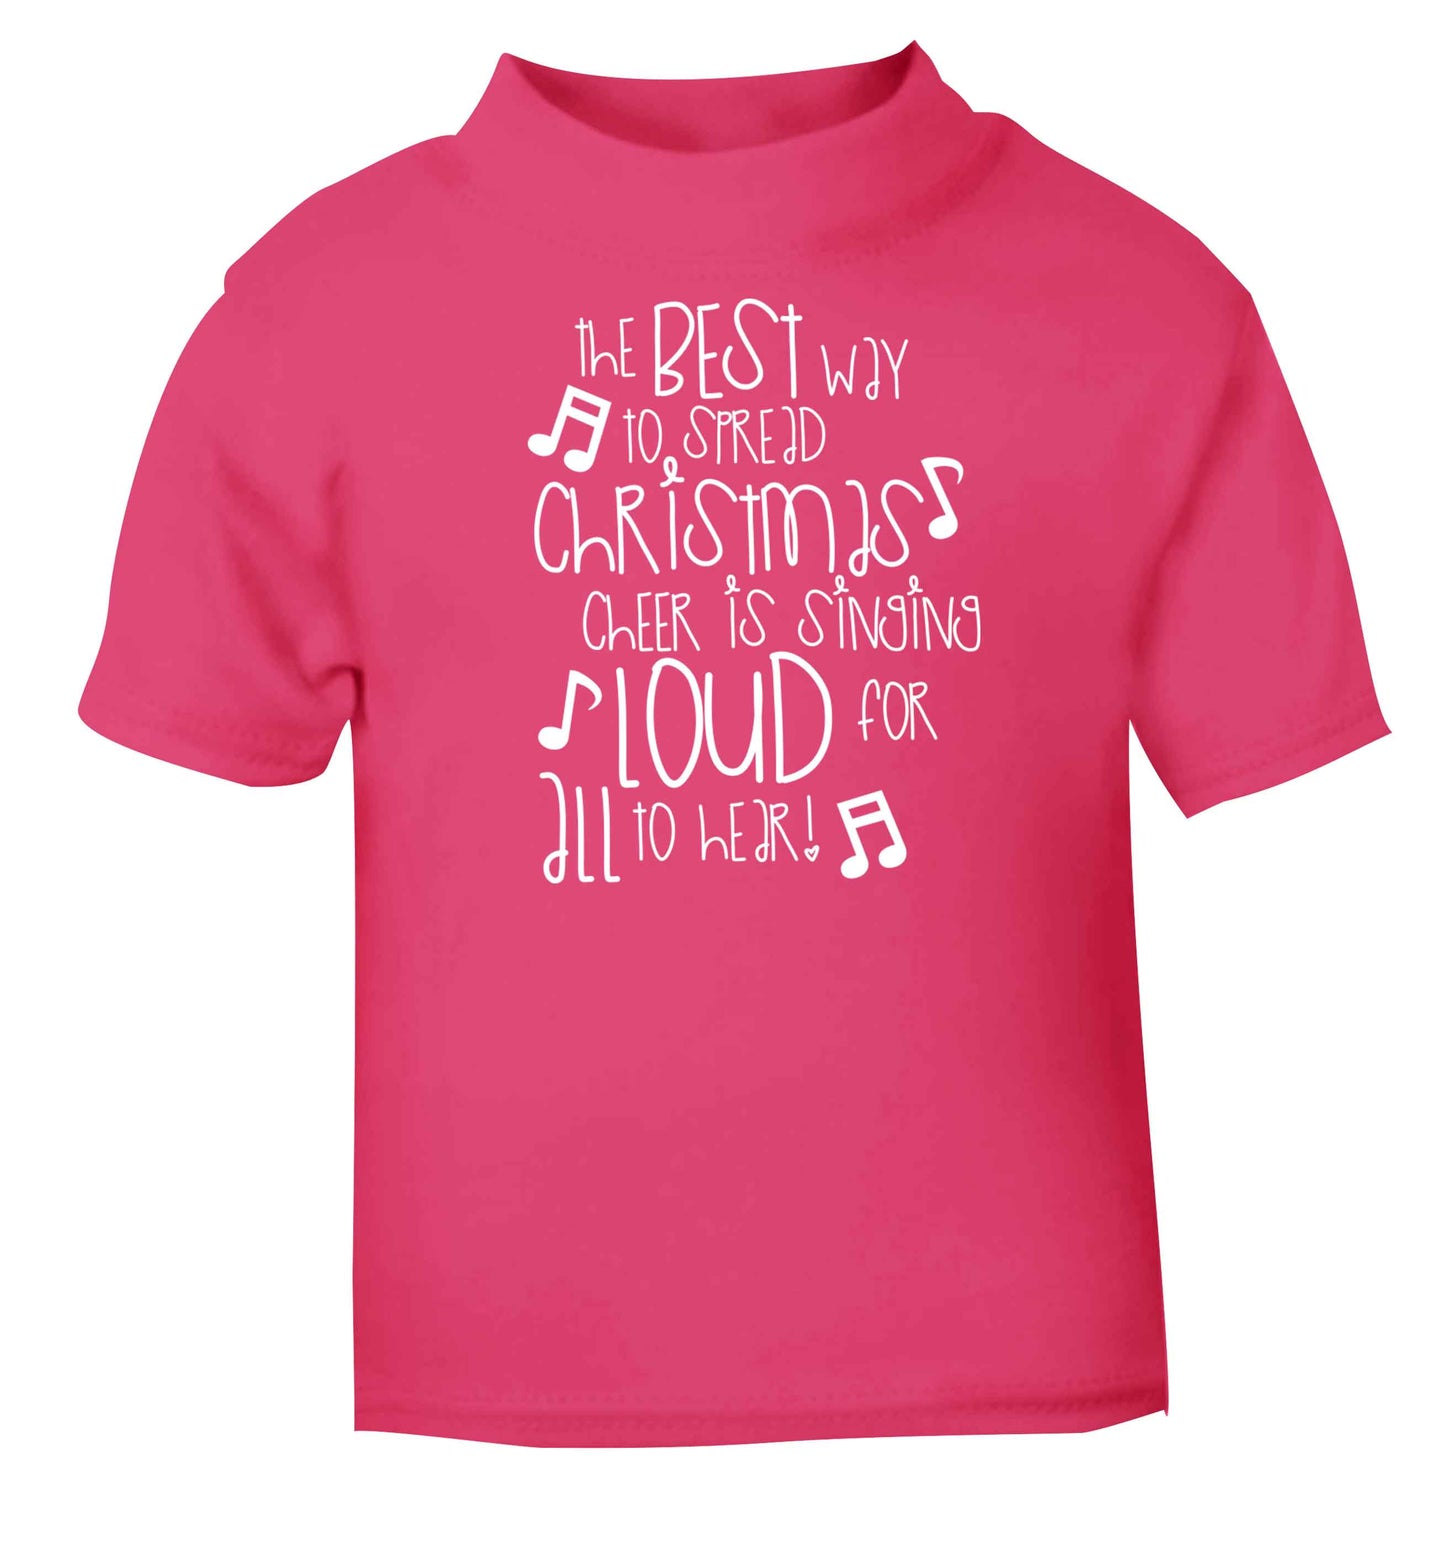 The best way to spread Christmas cheer is singing loud for all to hear pink baby toddler Tshirt 2 Years